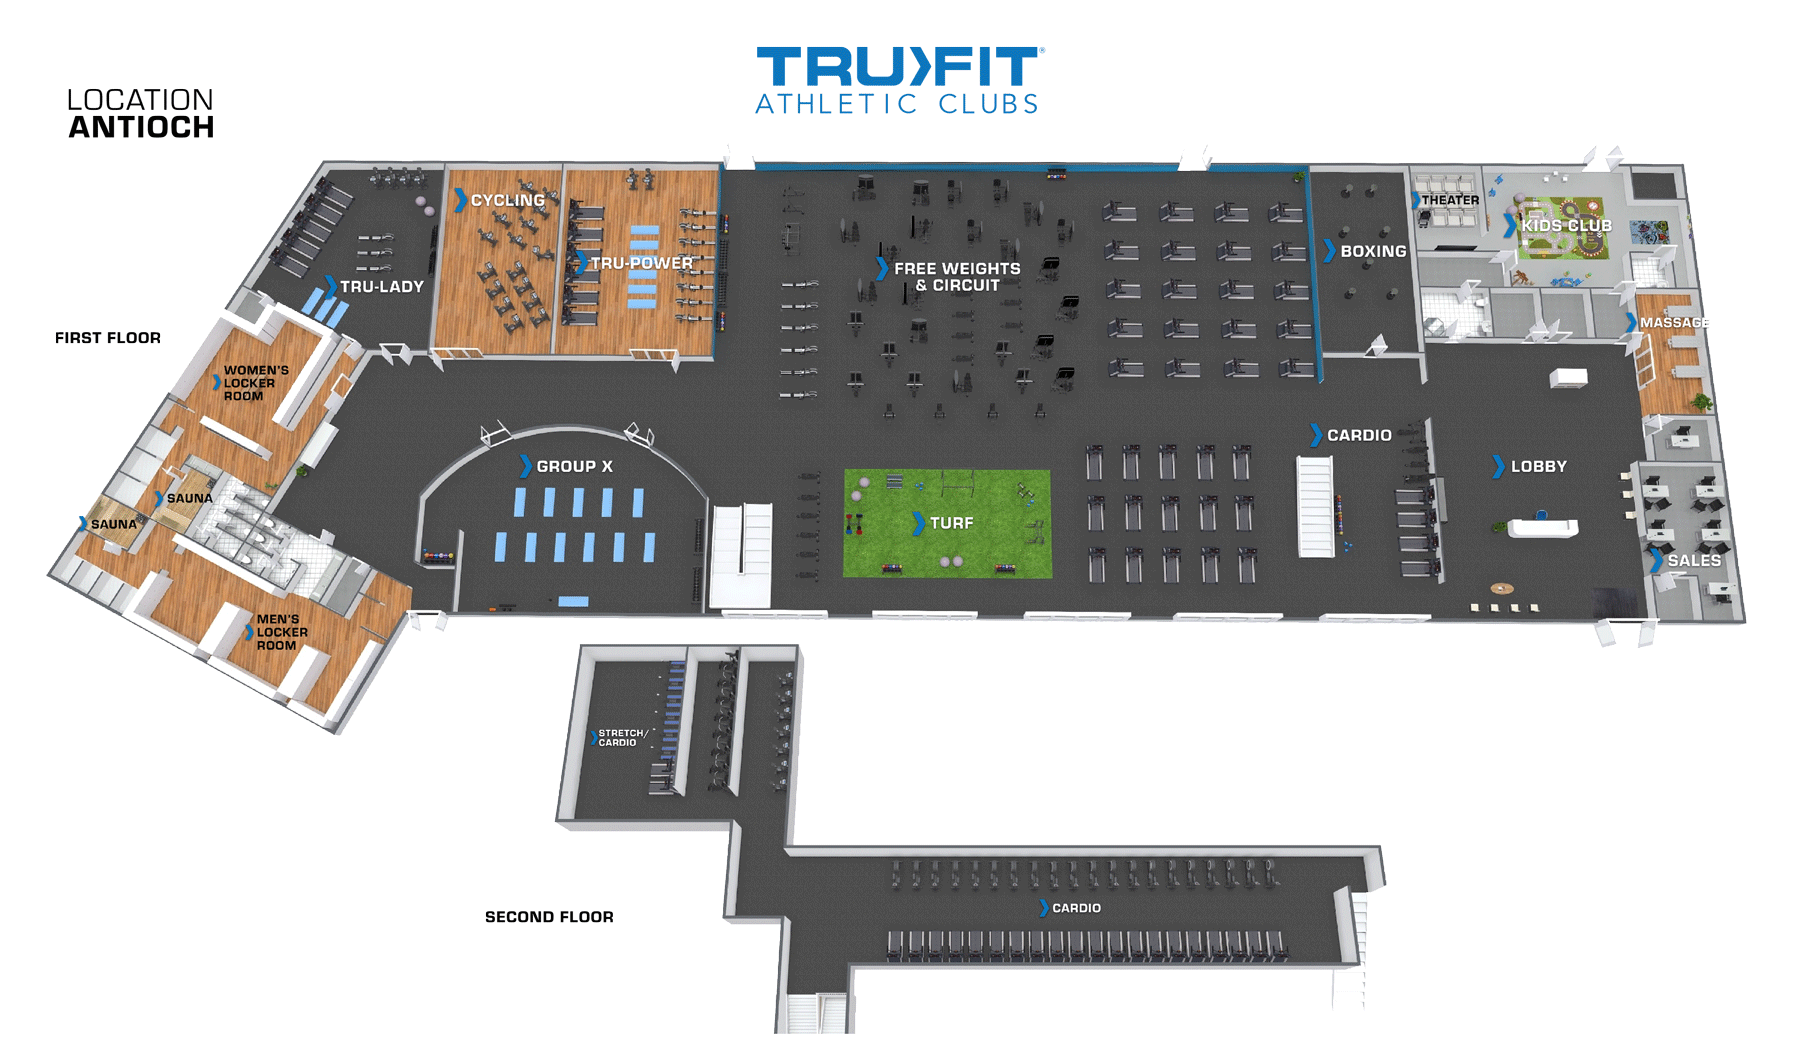 TRUFIT ATHLETIC CLUB - 1508 Gallatin Pike S, Nashville, Tennessee